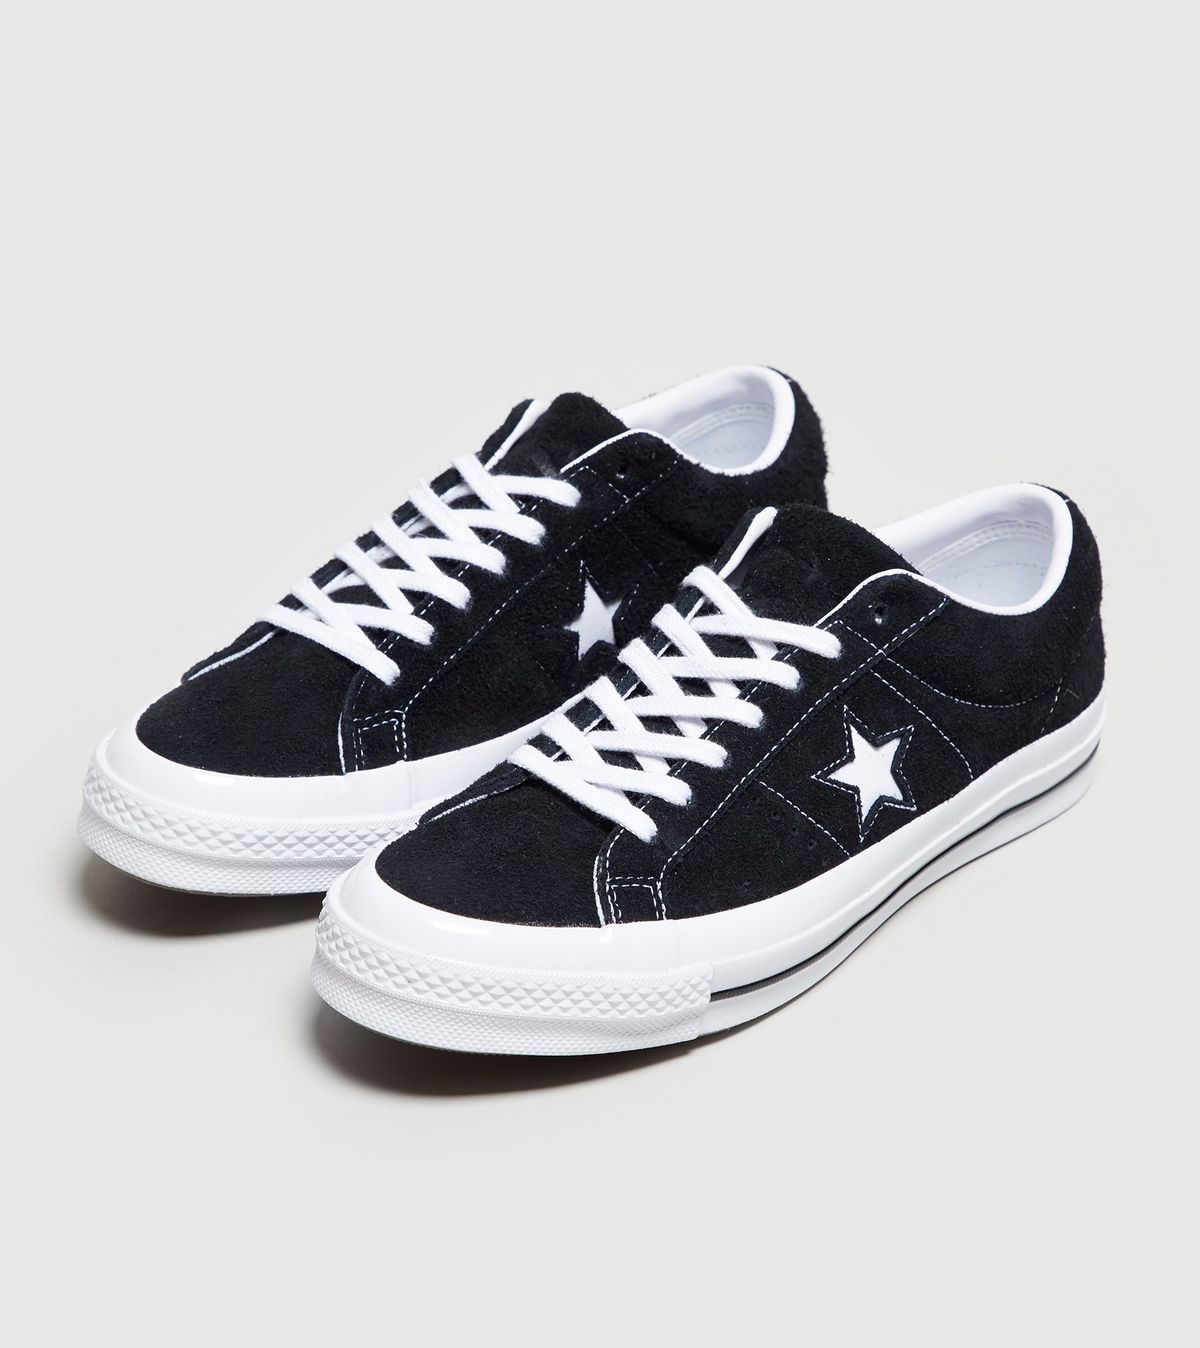 Converse One Star Suede Ox